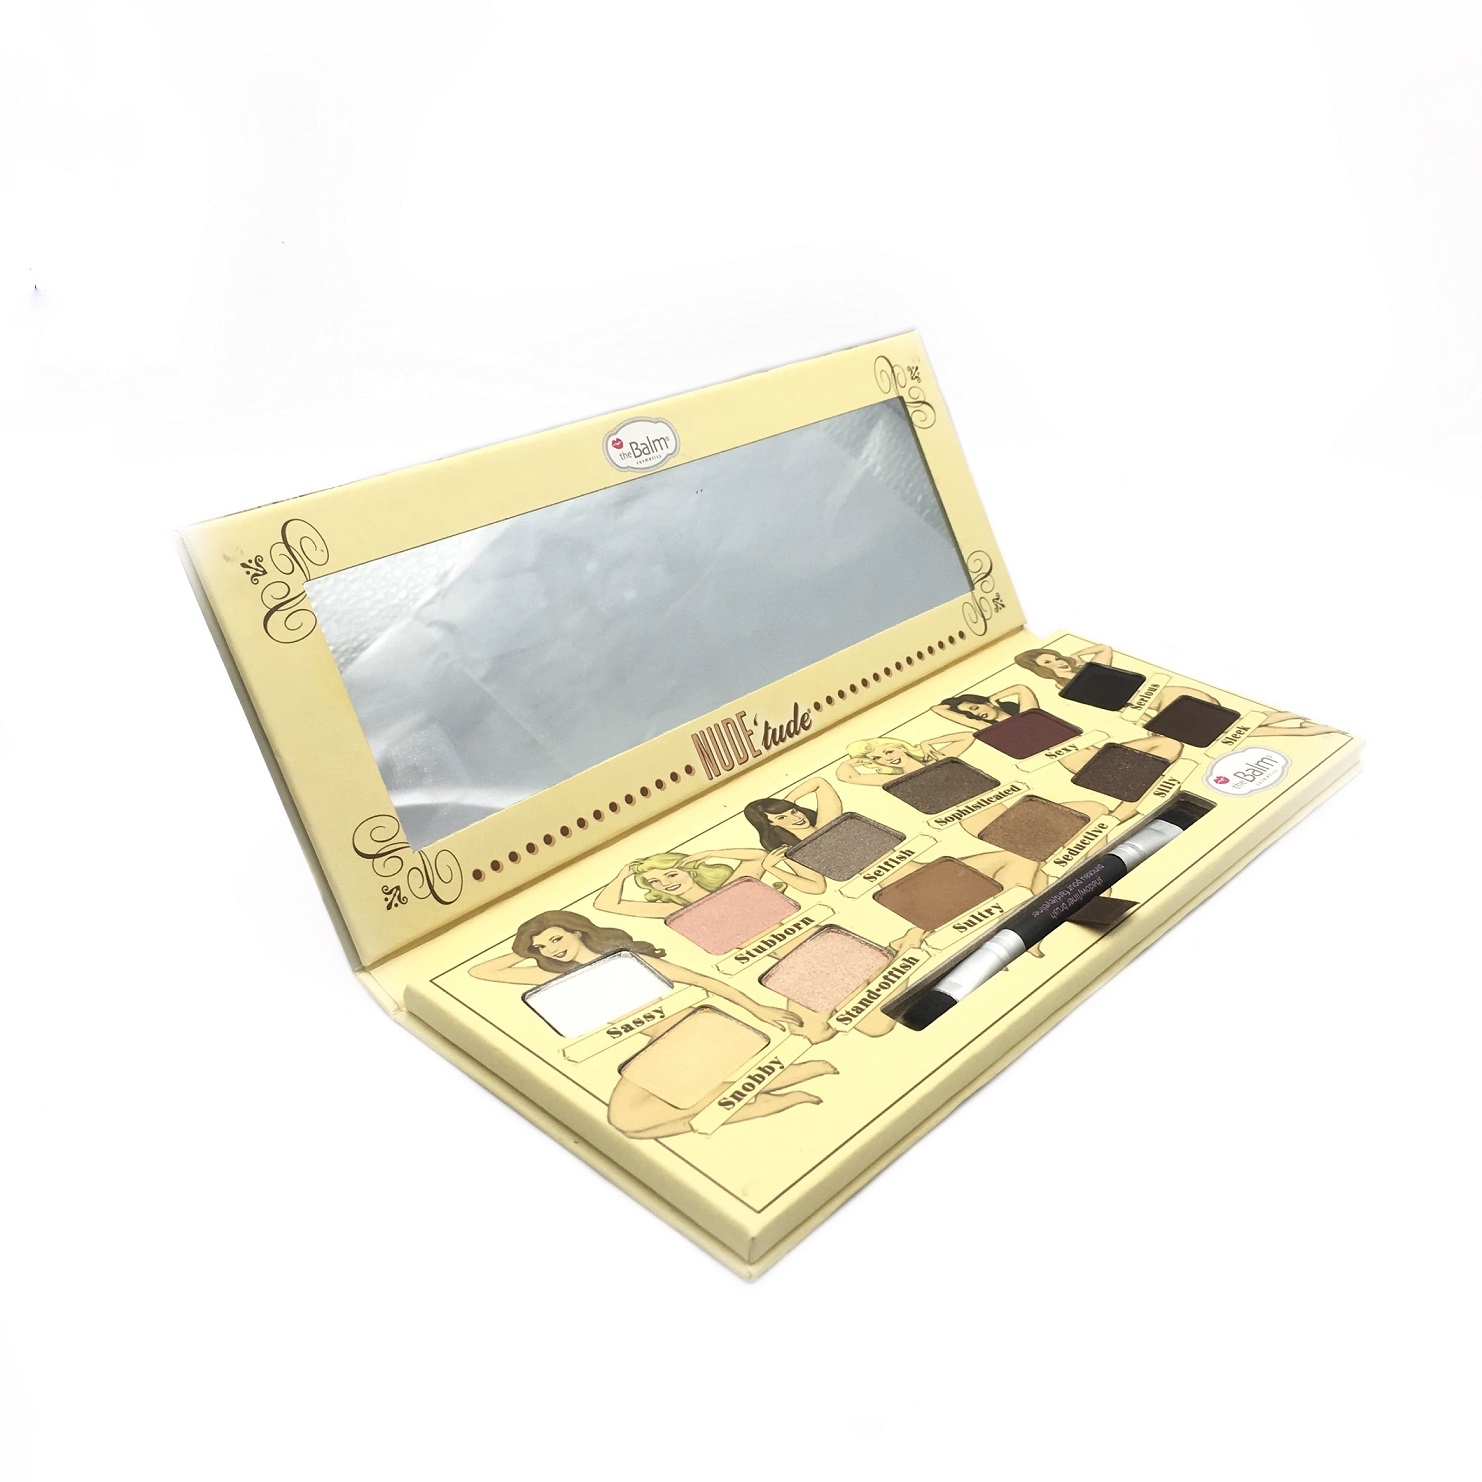 The Balm Nude Eyeshadow Set And Palette